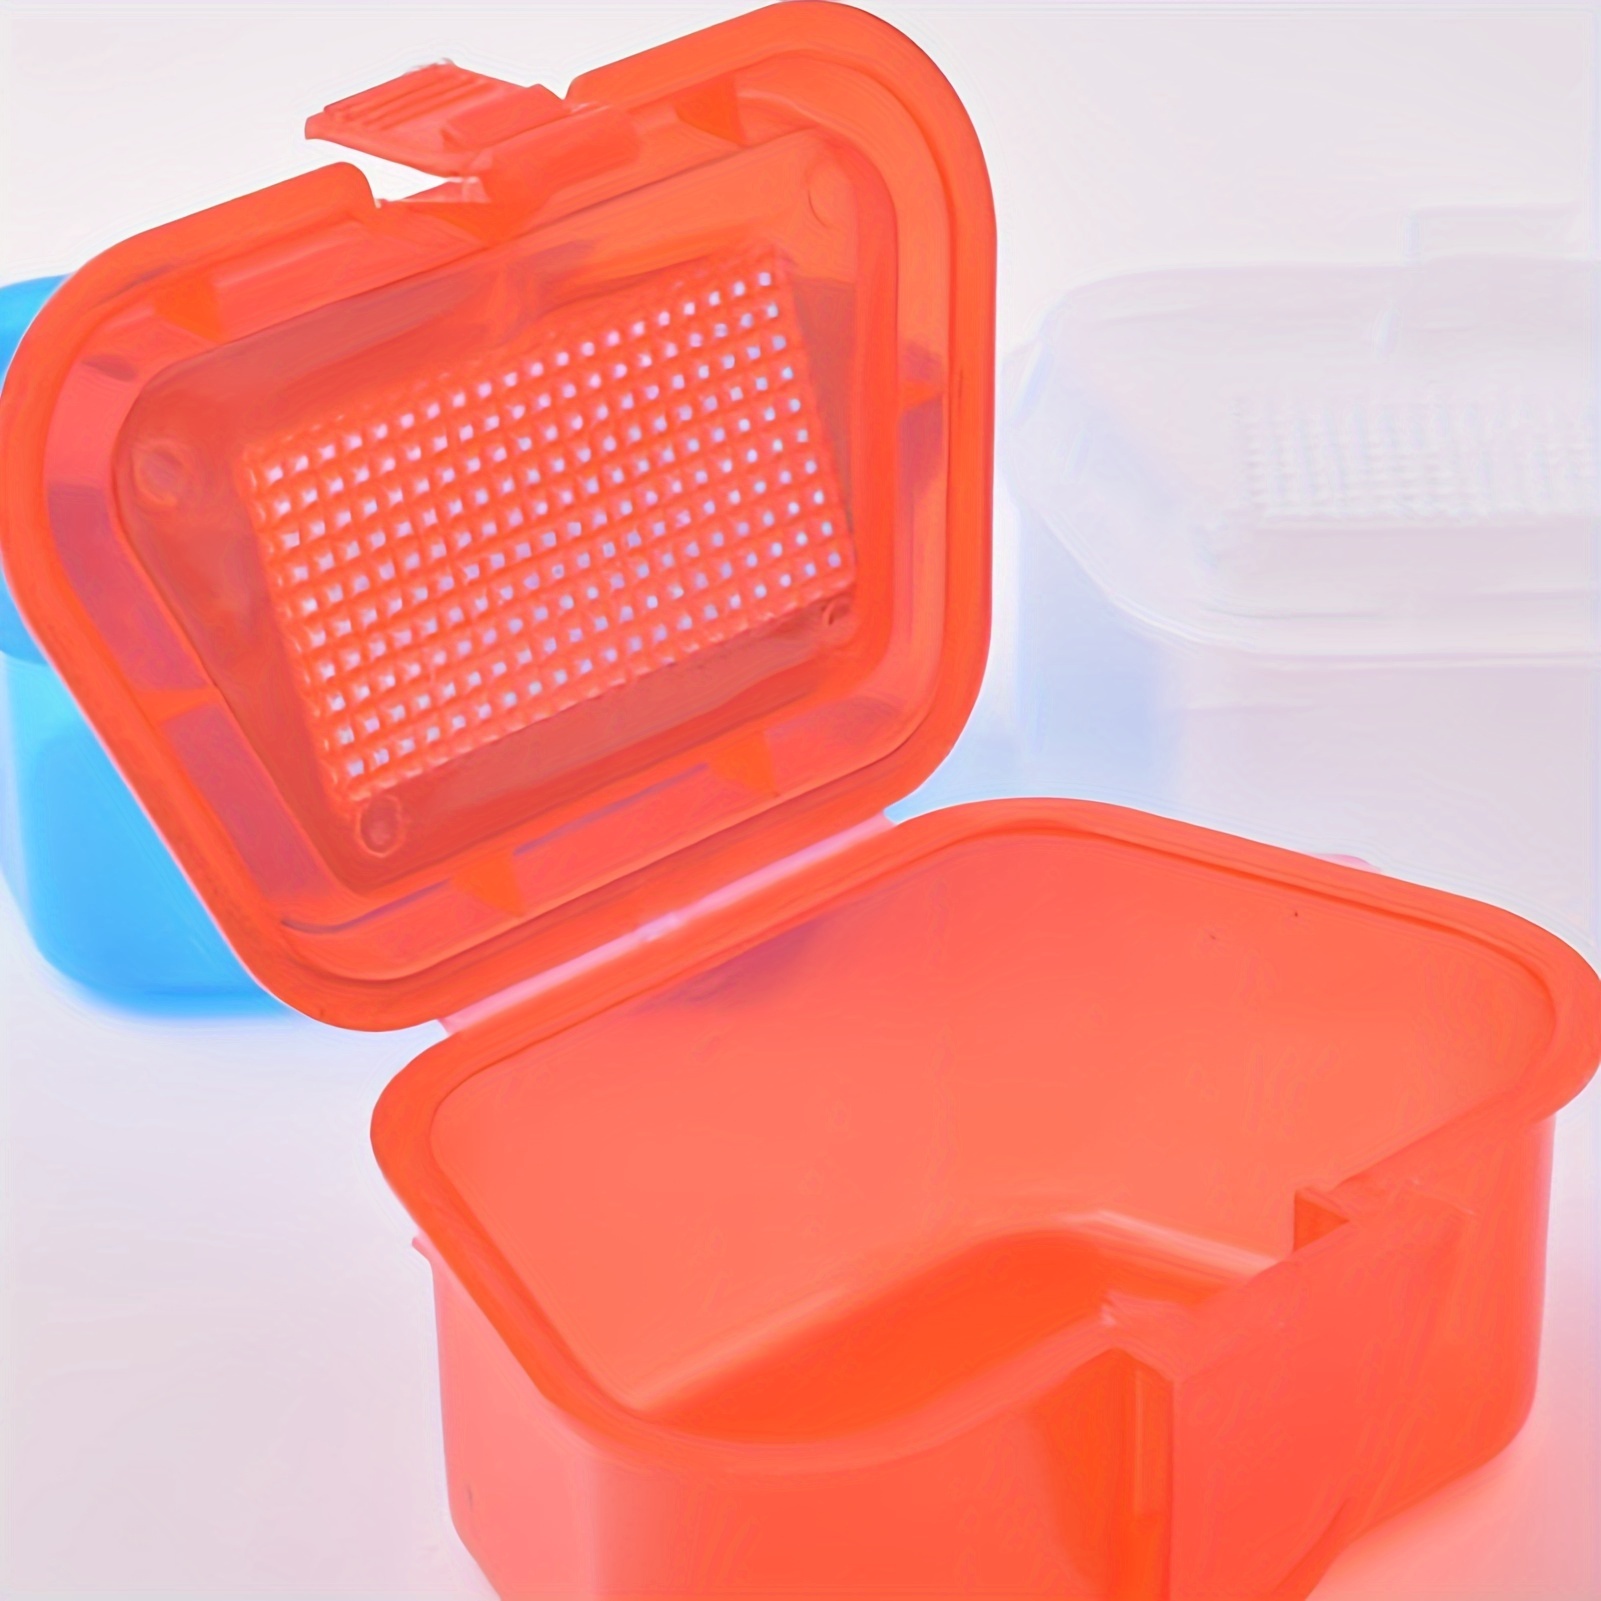 S/M/L Size Worm Box Breathable Plastic Fishing Bait Storage Fishing worm  box Fishing Case Live Earthworm Lures Container 